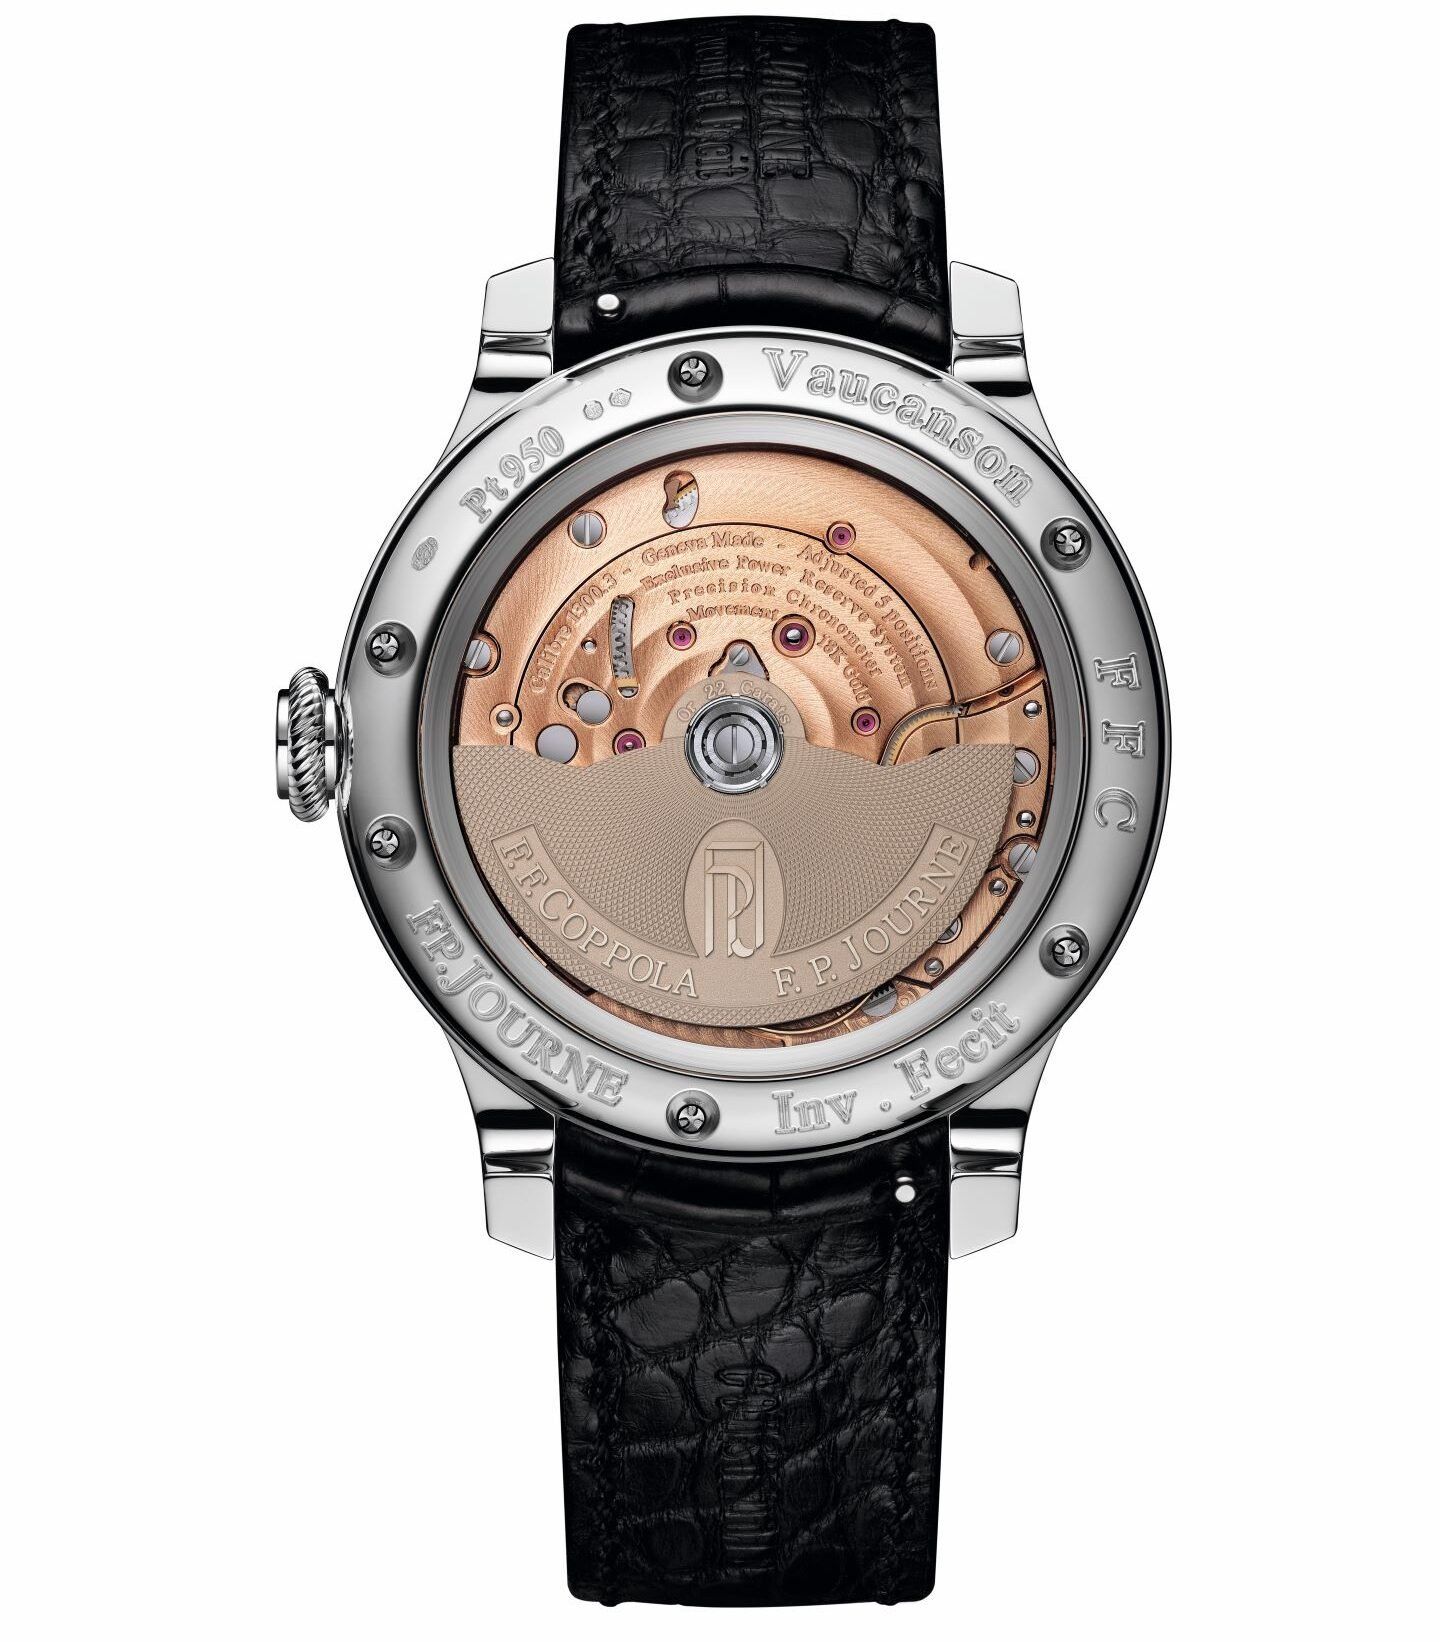 F.P Journe Switches To Digital Time With The New FFC Timepiece In The Classique Collection